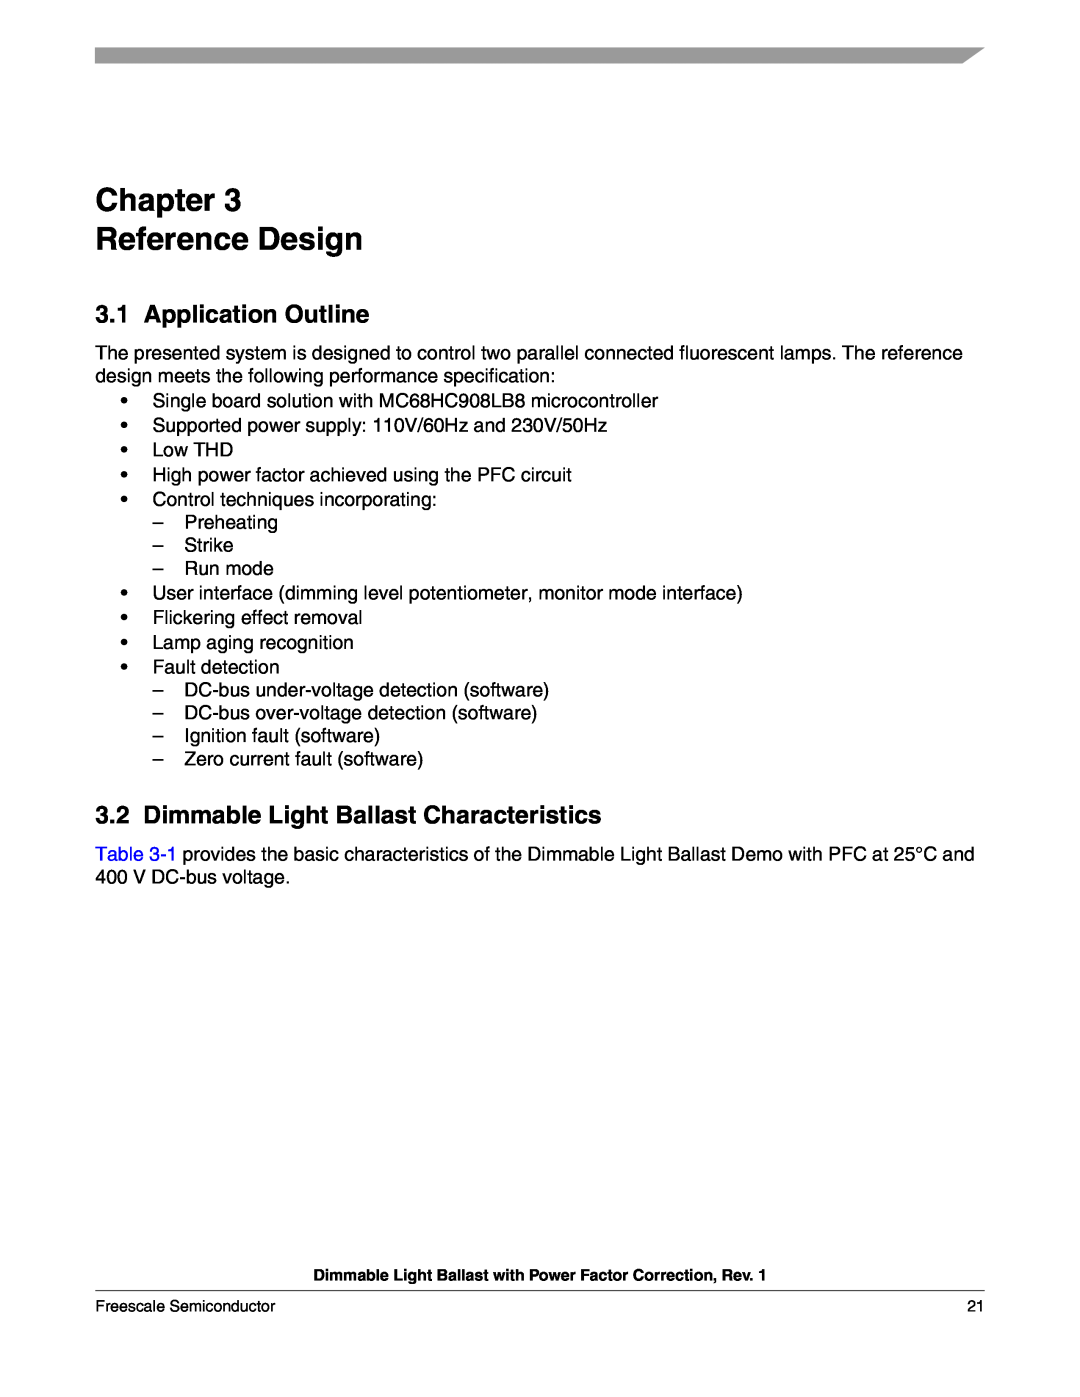 Freescale Semiconductor M68HC08 Chapter Reference Design, Application Outline, Dimmable Light Ballast Characteristics 